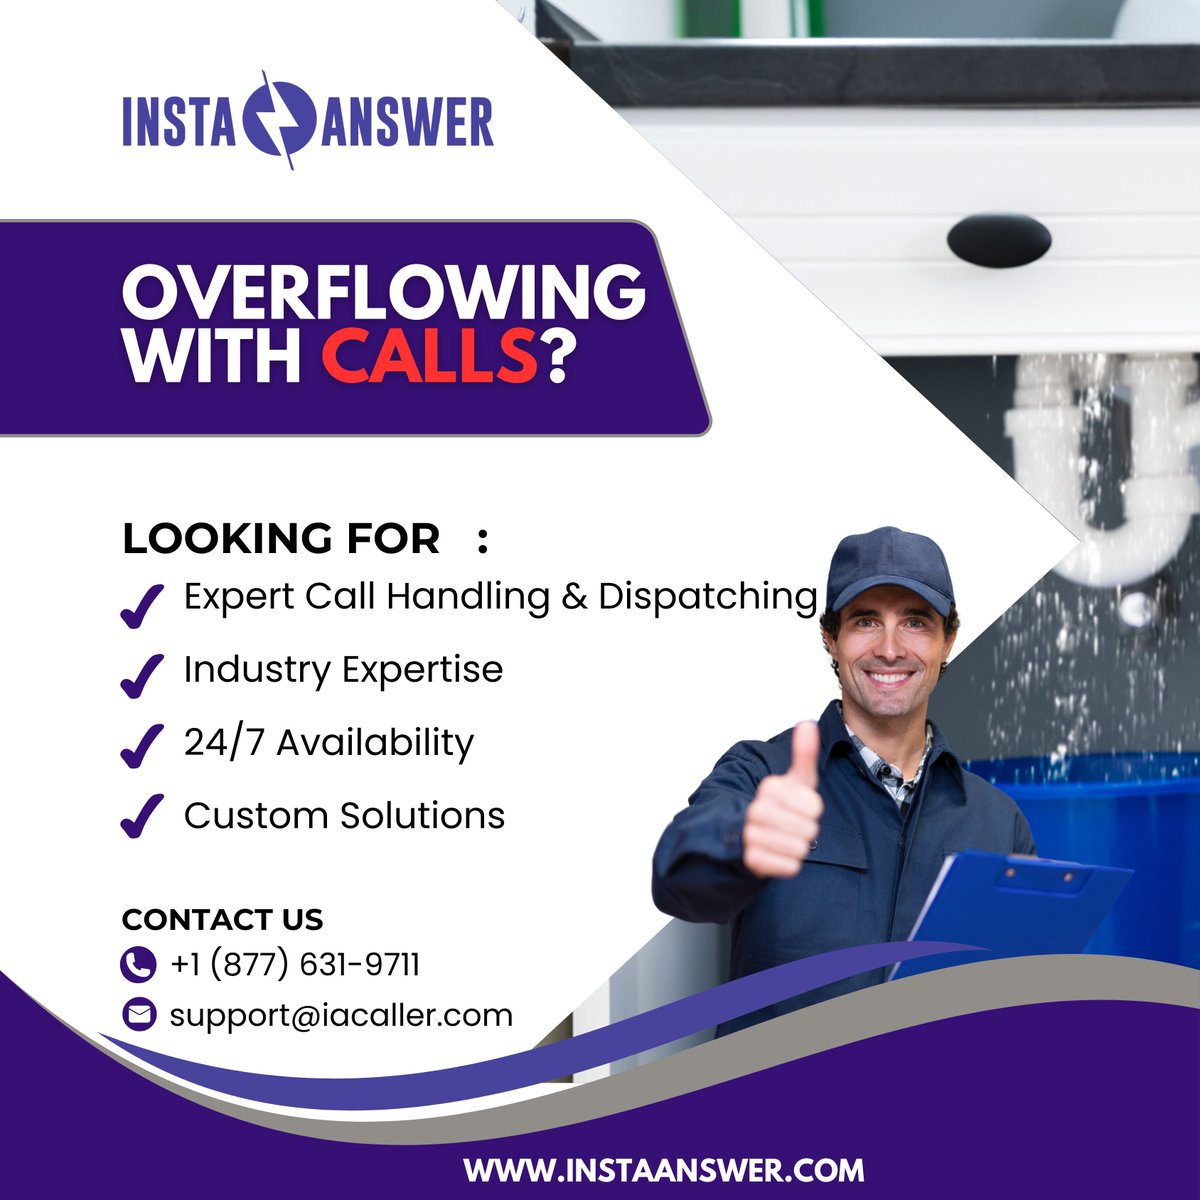 Don't let calls clog your day! We'll keep your lines clear so you can focus on fixing those pipes.

Call (877) 631-9711 or email support@iacaller.com to keep your business running smoothly!

#InstaAnswer #CustomerSupport #Plumberlife #CustomerService #Plumbing #CustomerSuccess